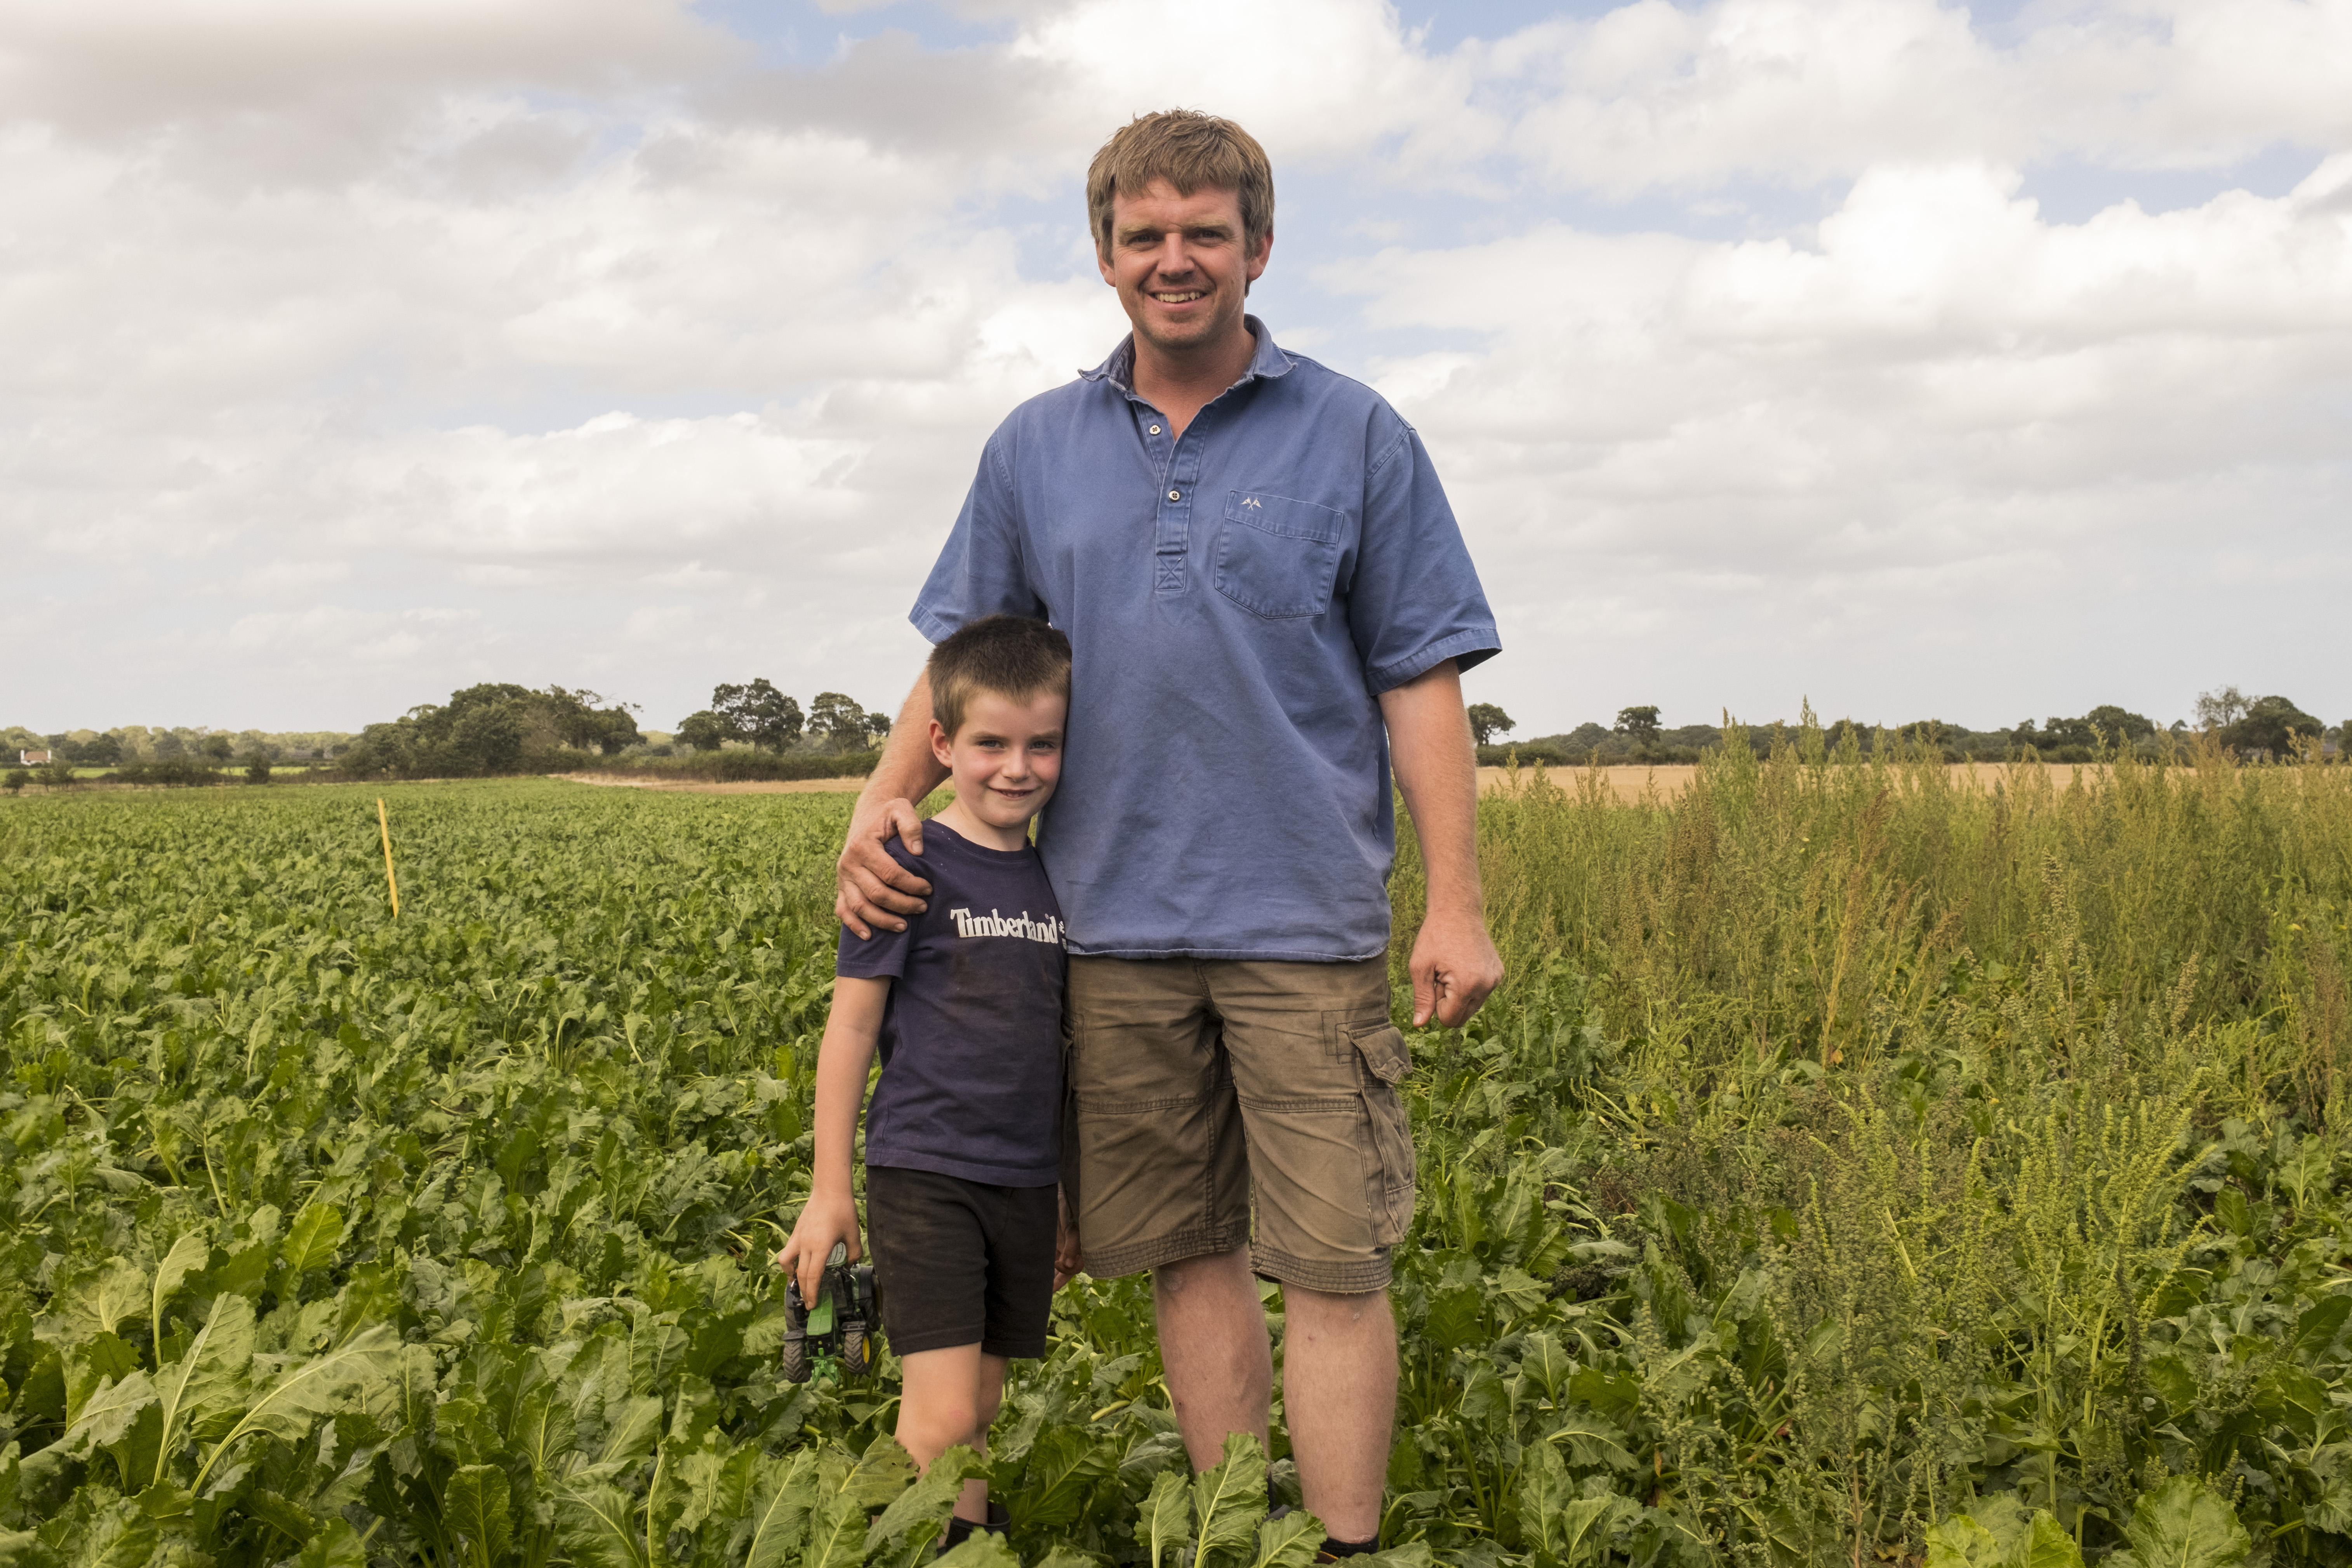 Robert and his son Ed standing next to the boundry between the treated and untreated section of the field with CONVISO® ONE